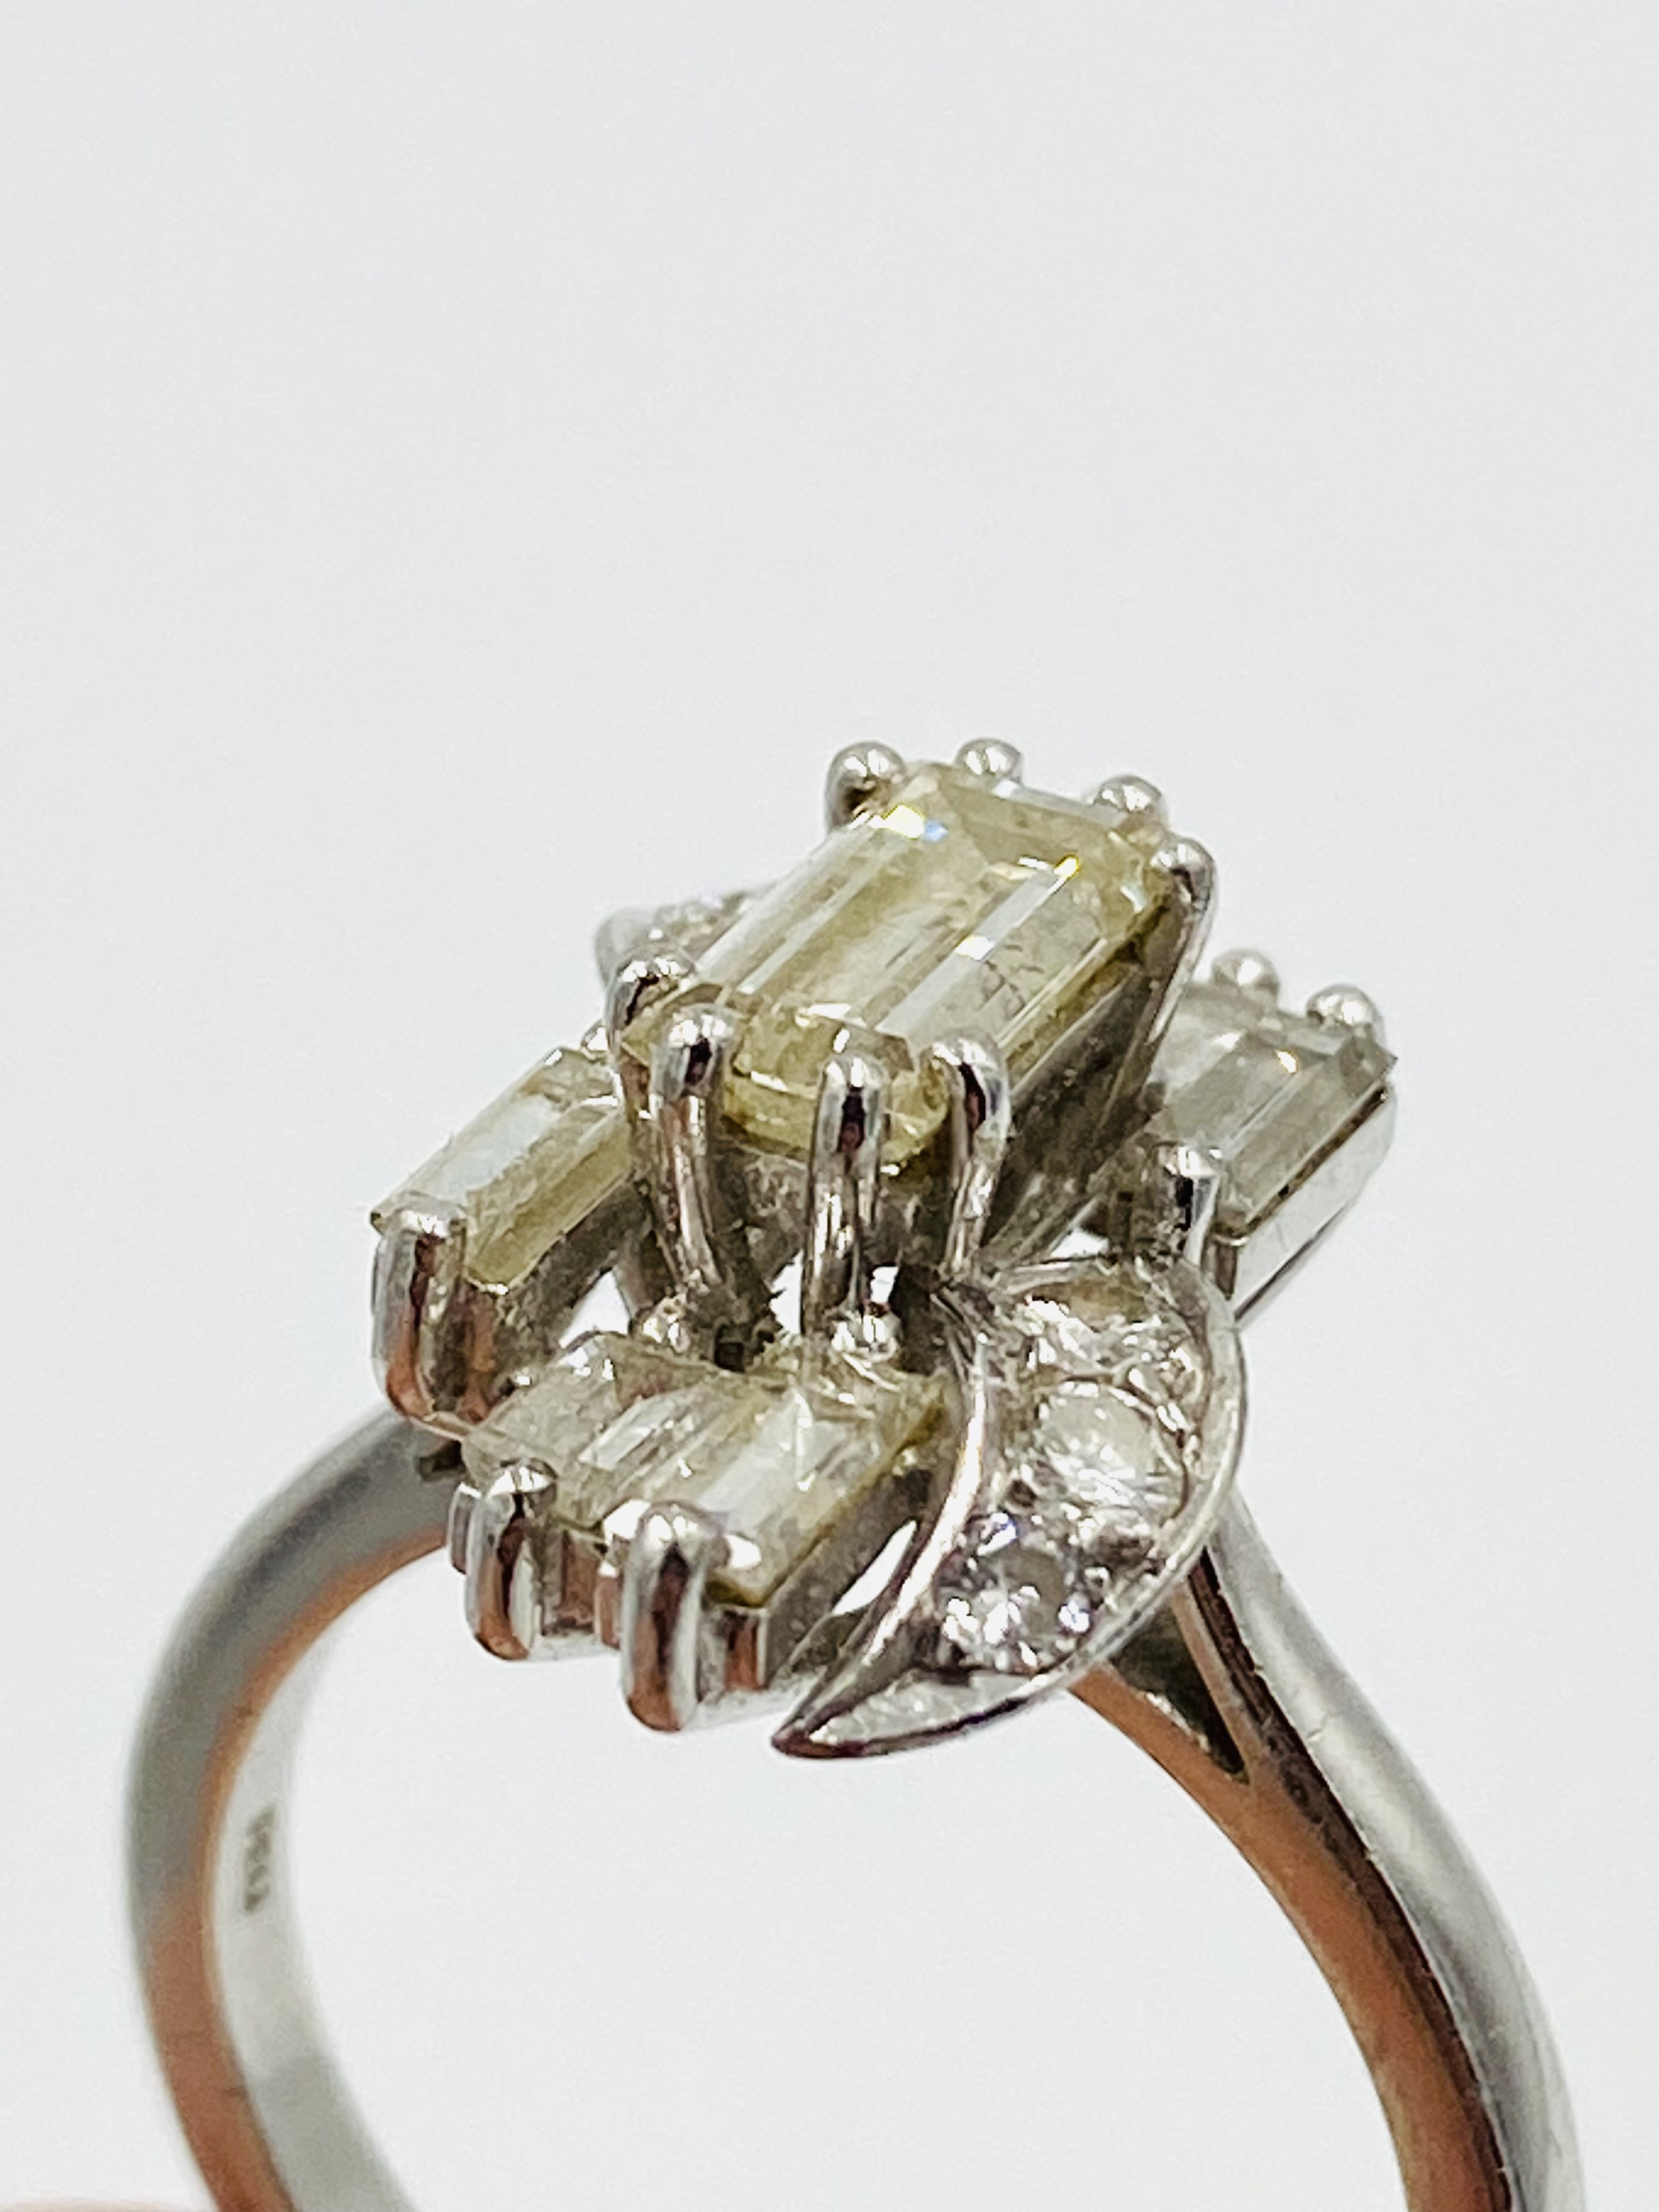 18ct white gold and diamond cocktail ring - Image 3 of 5